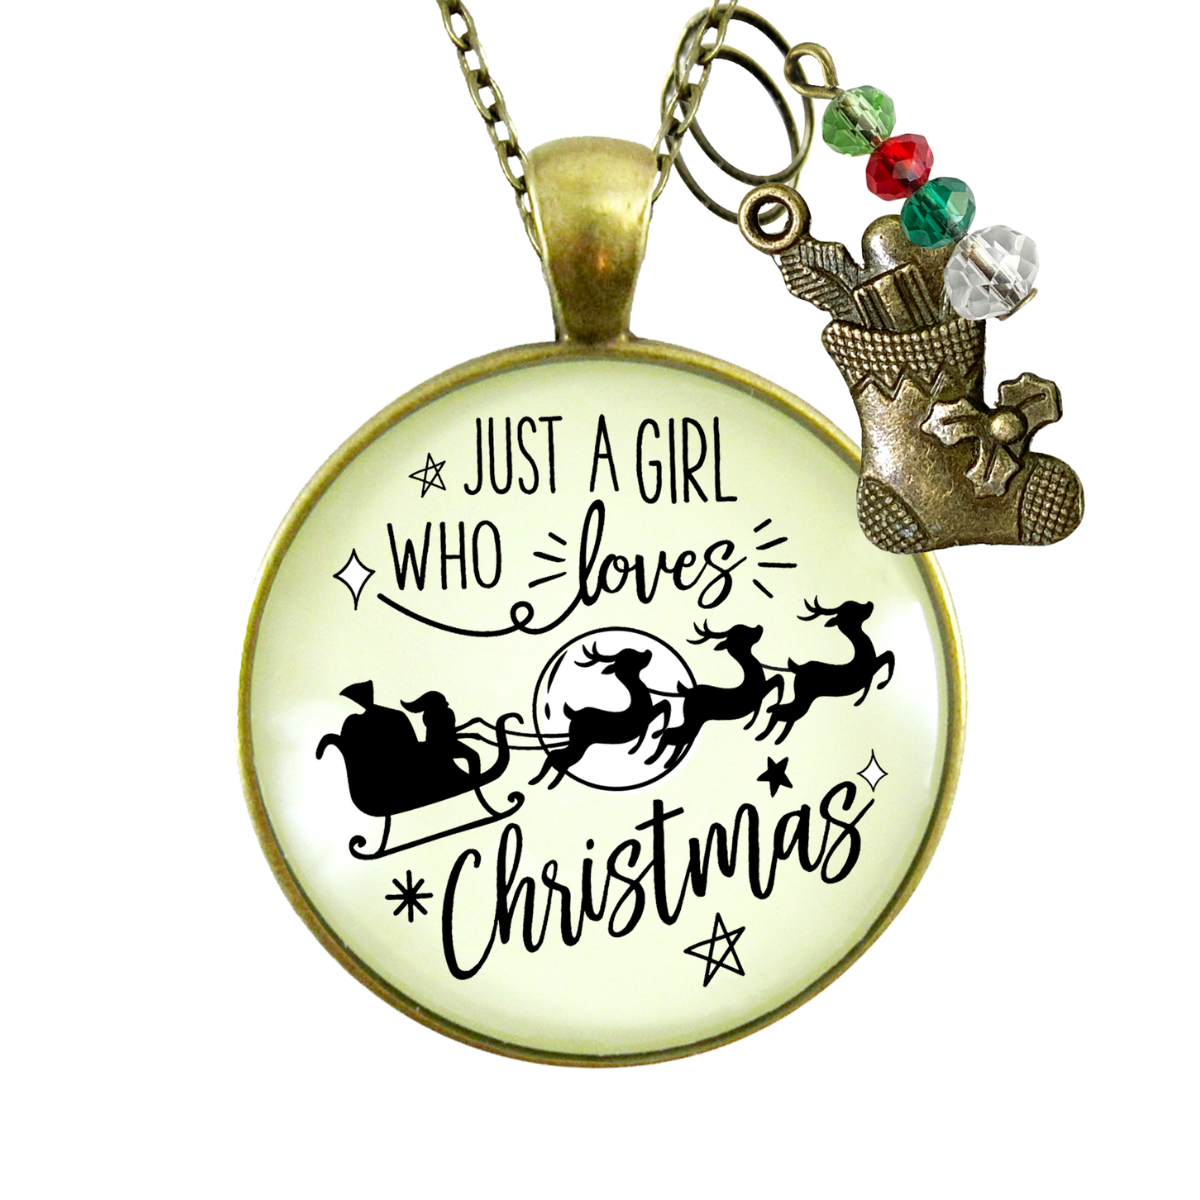 Christmas Reindeer Necklace Just a Girl Who Loves Christmas Pendant Stocking Charm Handmade Pendant  Necklace - Gutsy Goodness Handmade Jewelry